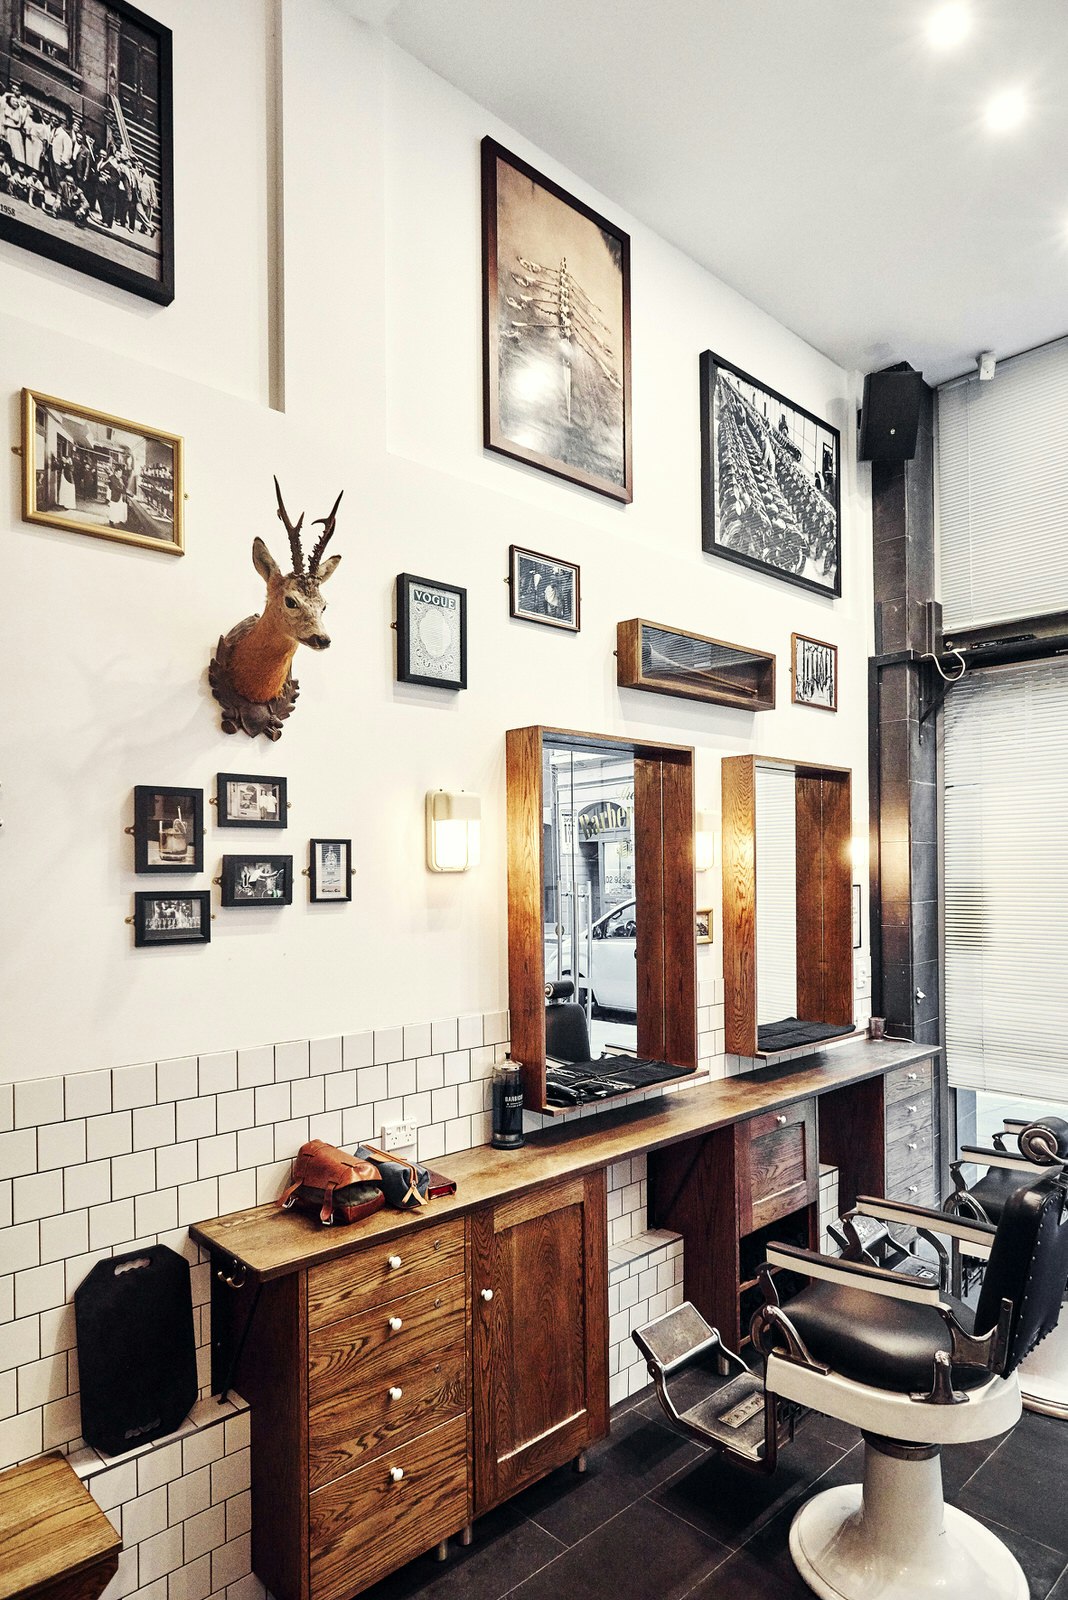 An old-fashioned barber shop interior with white tiled walls, framed photos, a small mounted deer's head and barbershop chairs